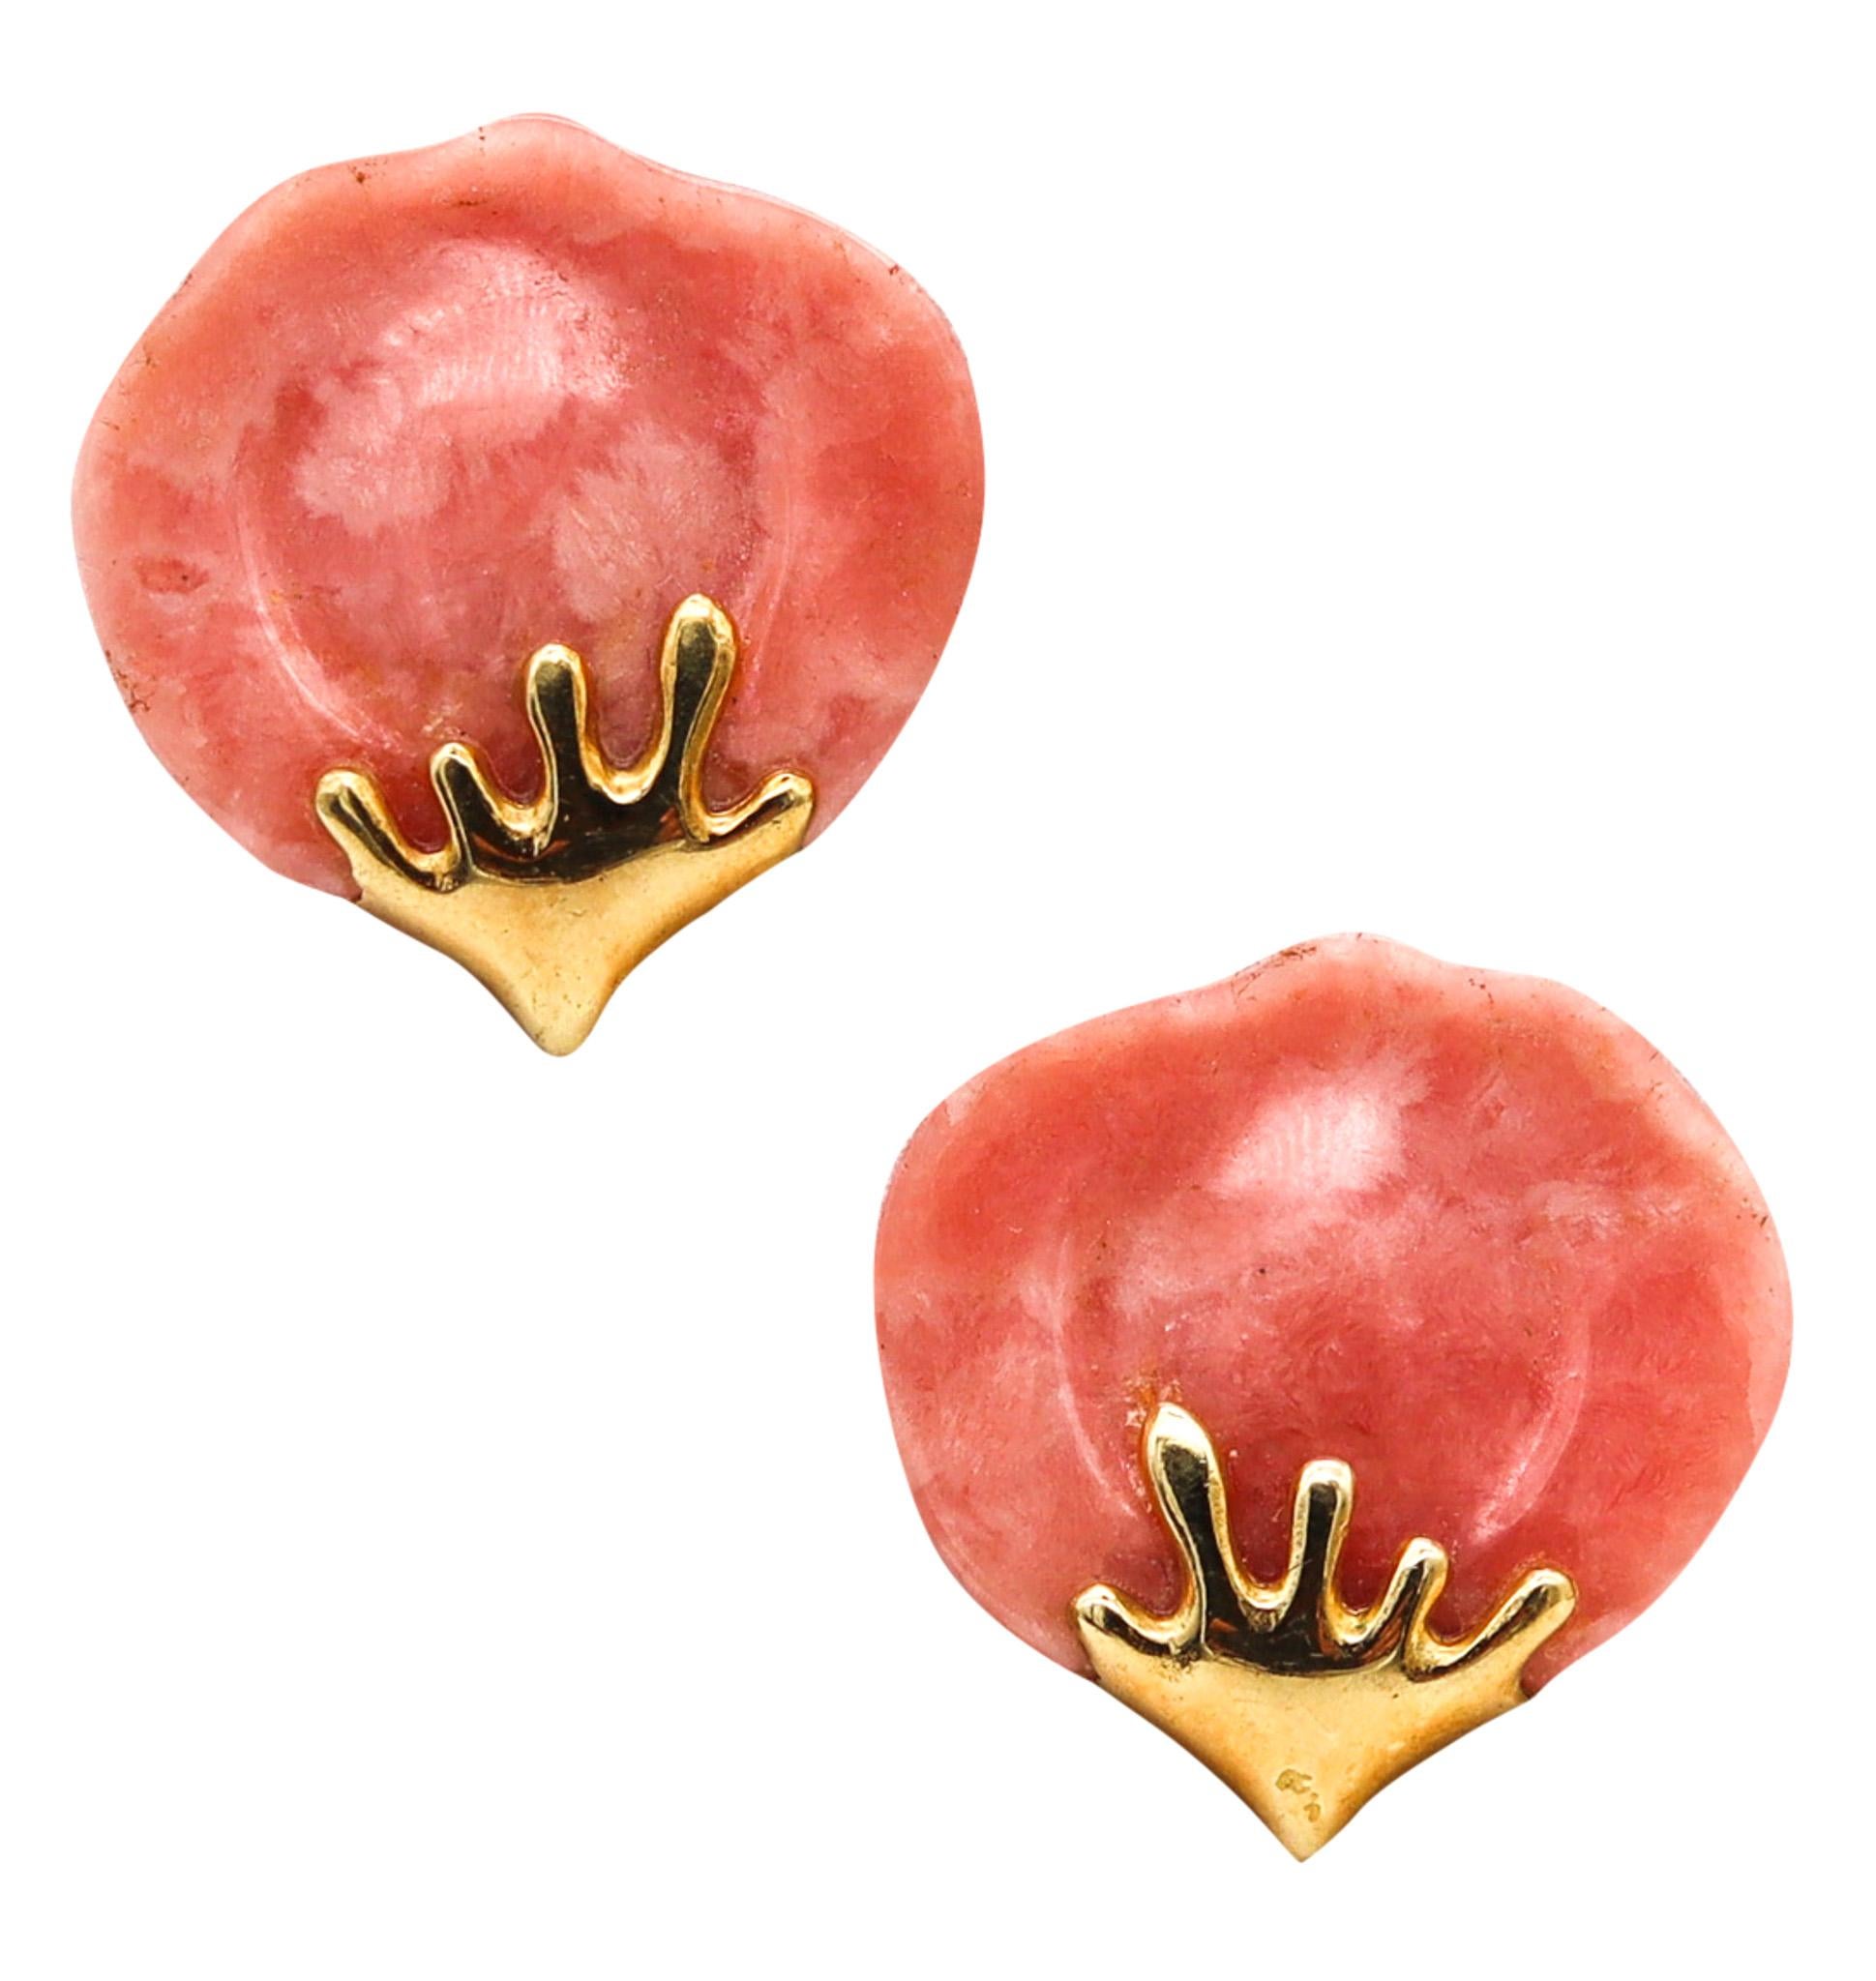 Tiffany & Co. 1977 Angela Cummings Petals Earrings In 18Kt Gold With Pink Agate